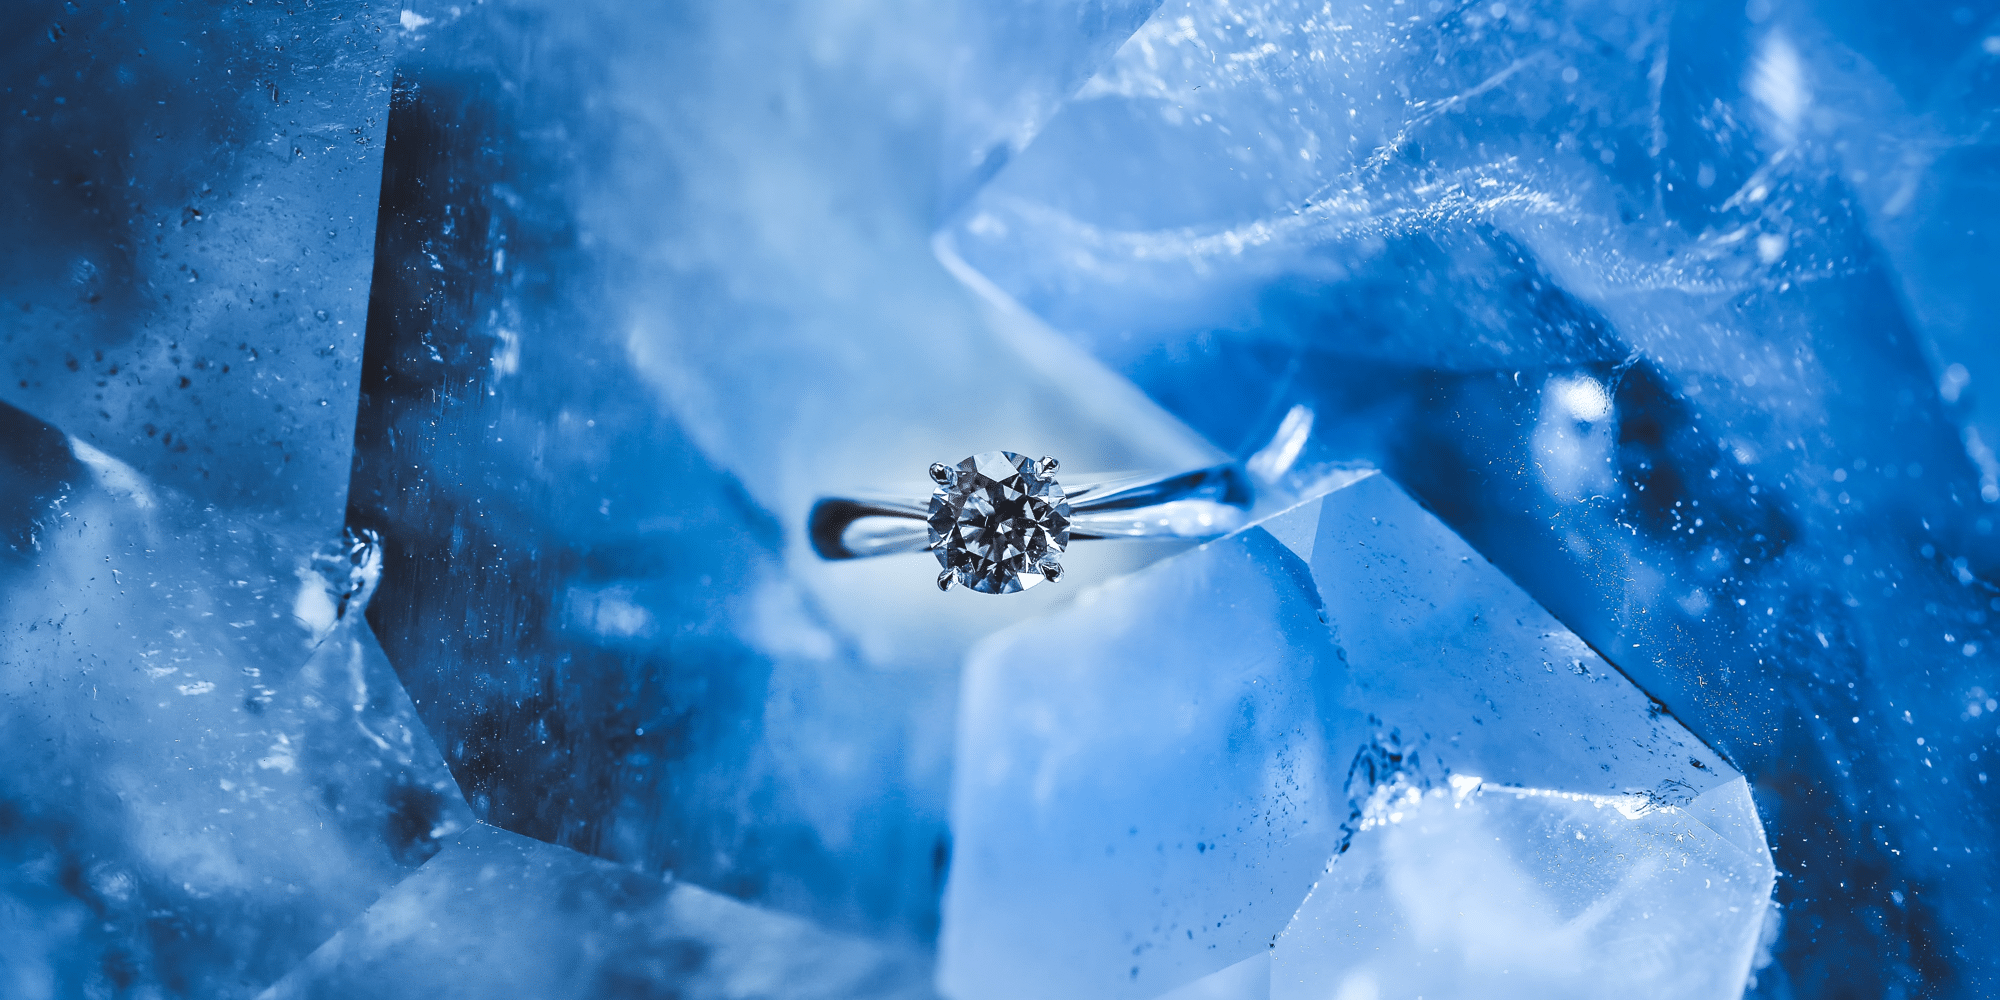 De Beers group introduces world's first blockchain-backed diamond